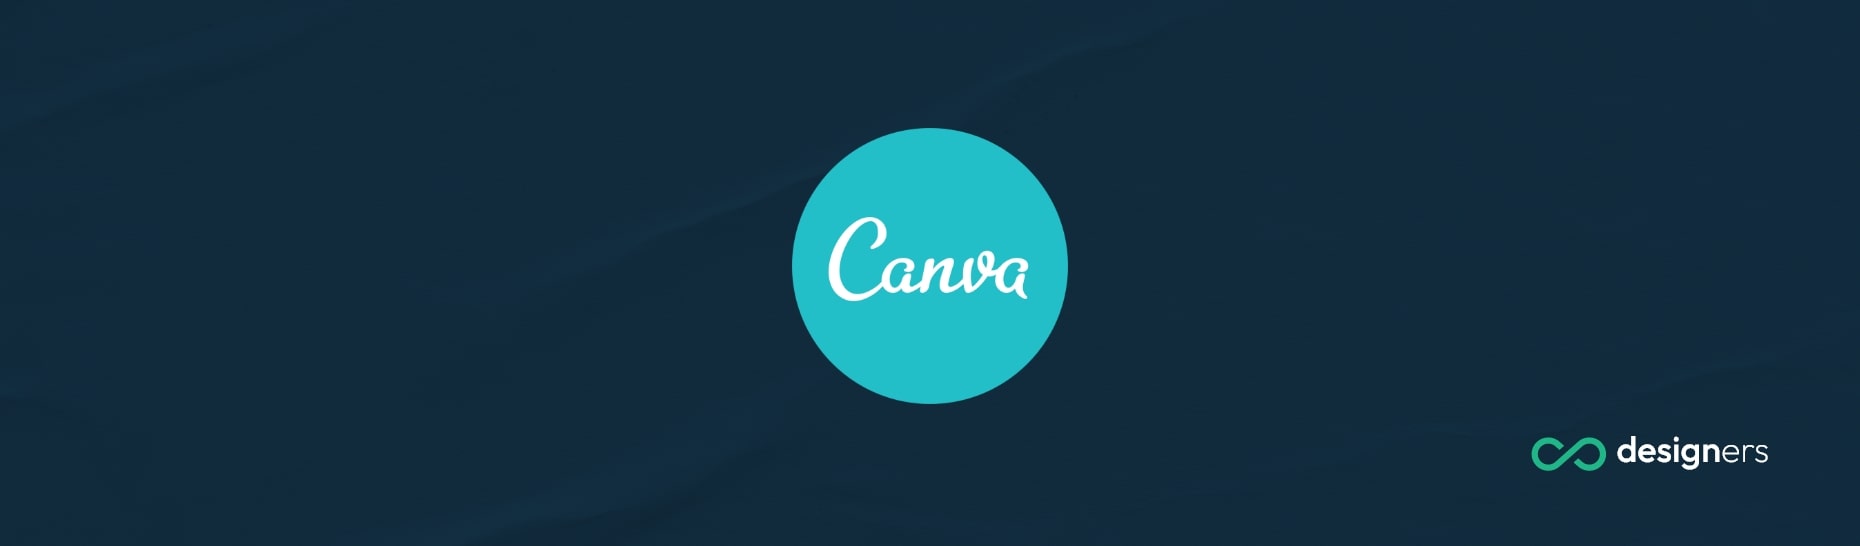 How To Make a Gradient in Canva For Free?